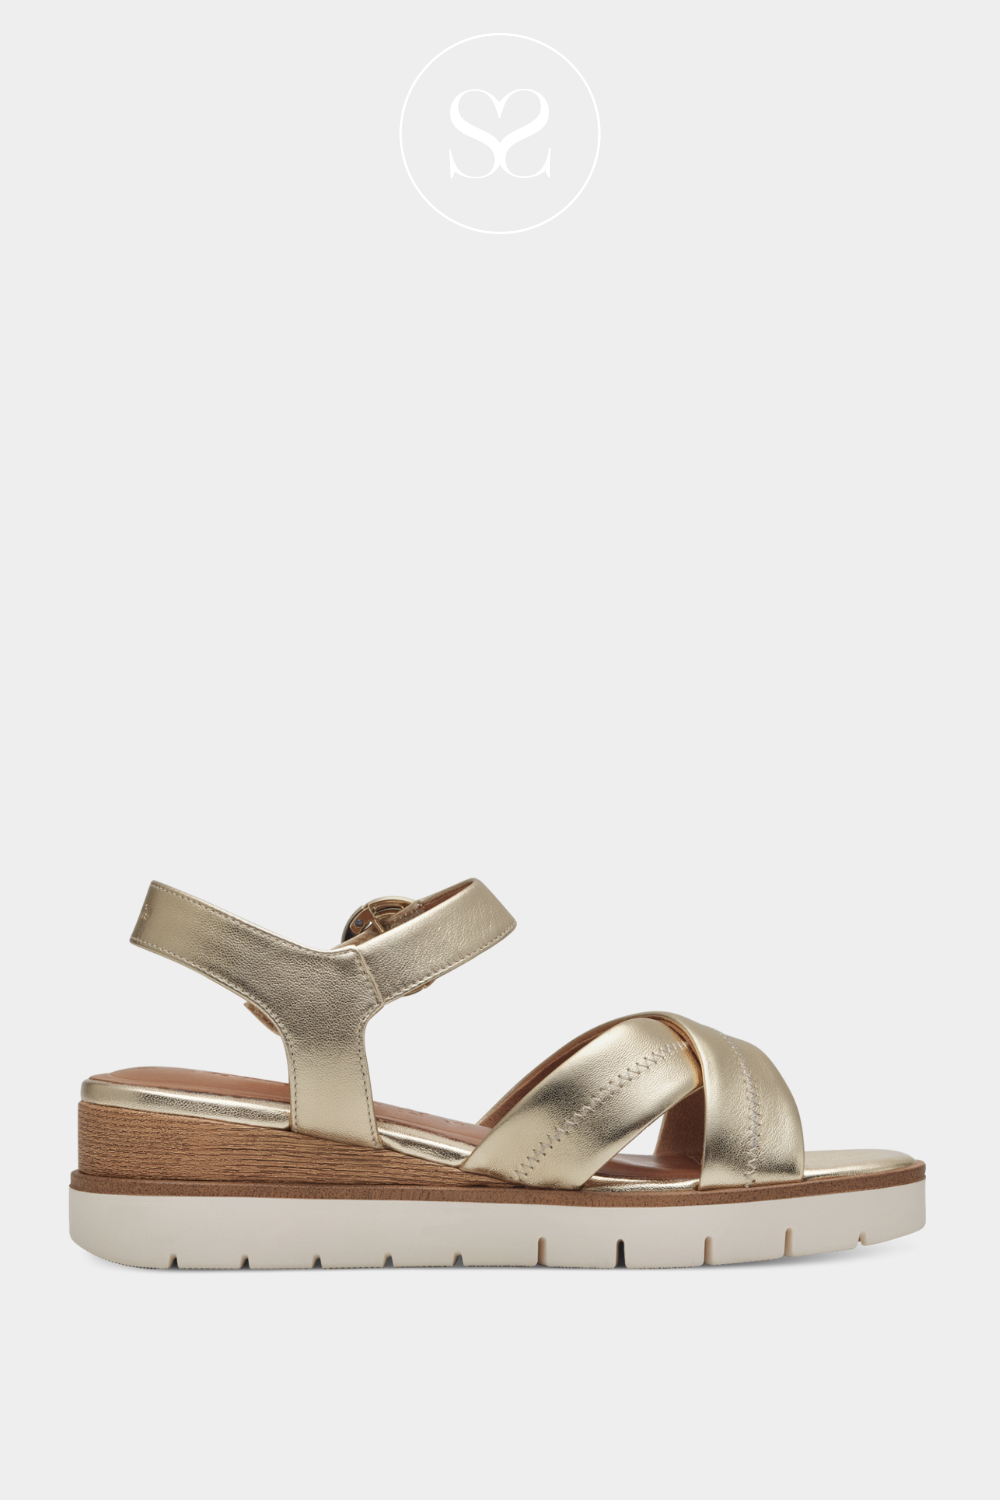 TAMARIS 1-28202-42 GOLD LEATHER WEDGE SANDALS WITH CRISS CROSS STRAPS AND ADJUSTABLE ANKLE STRAP